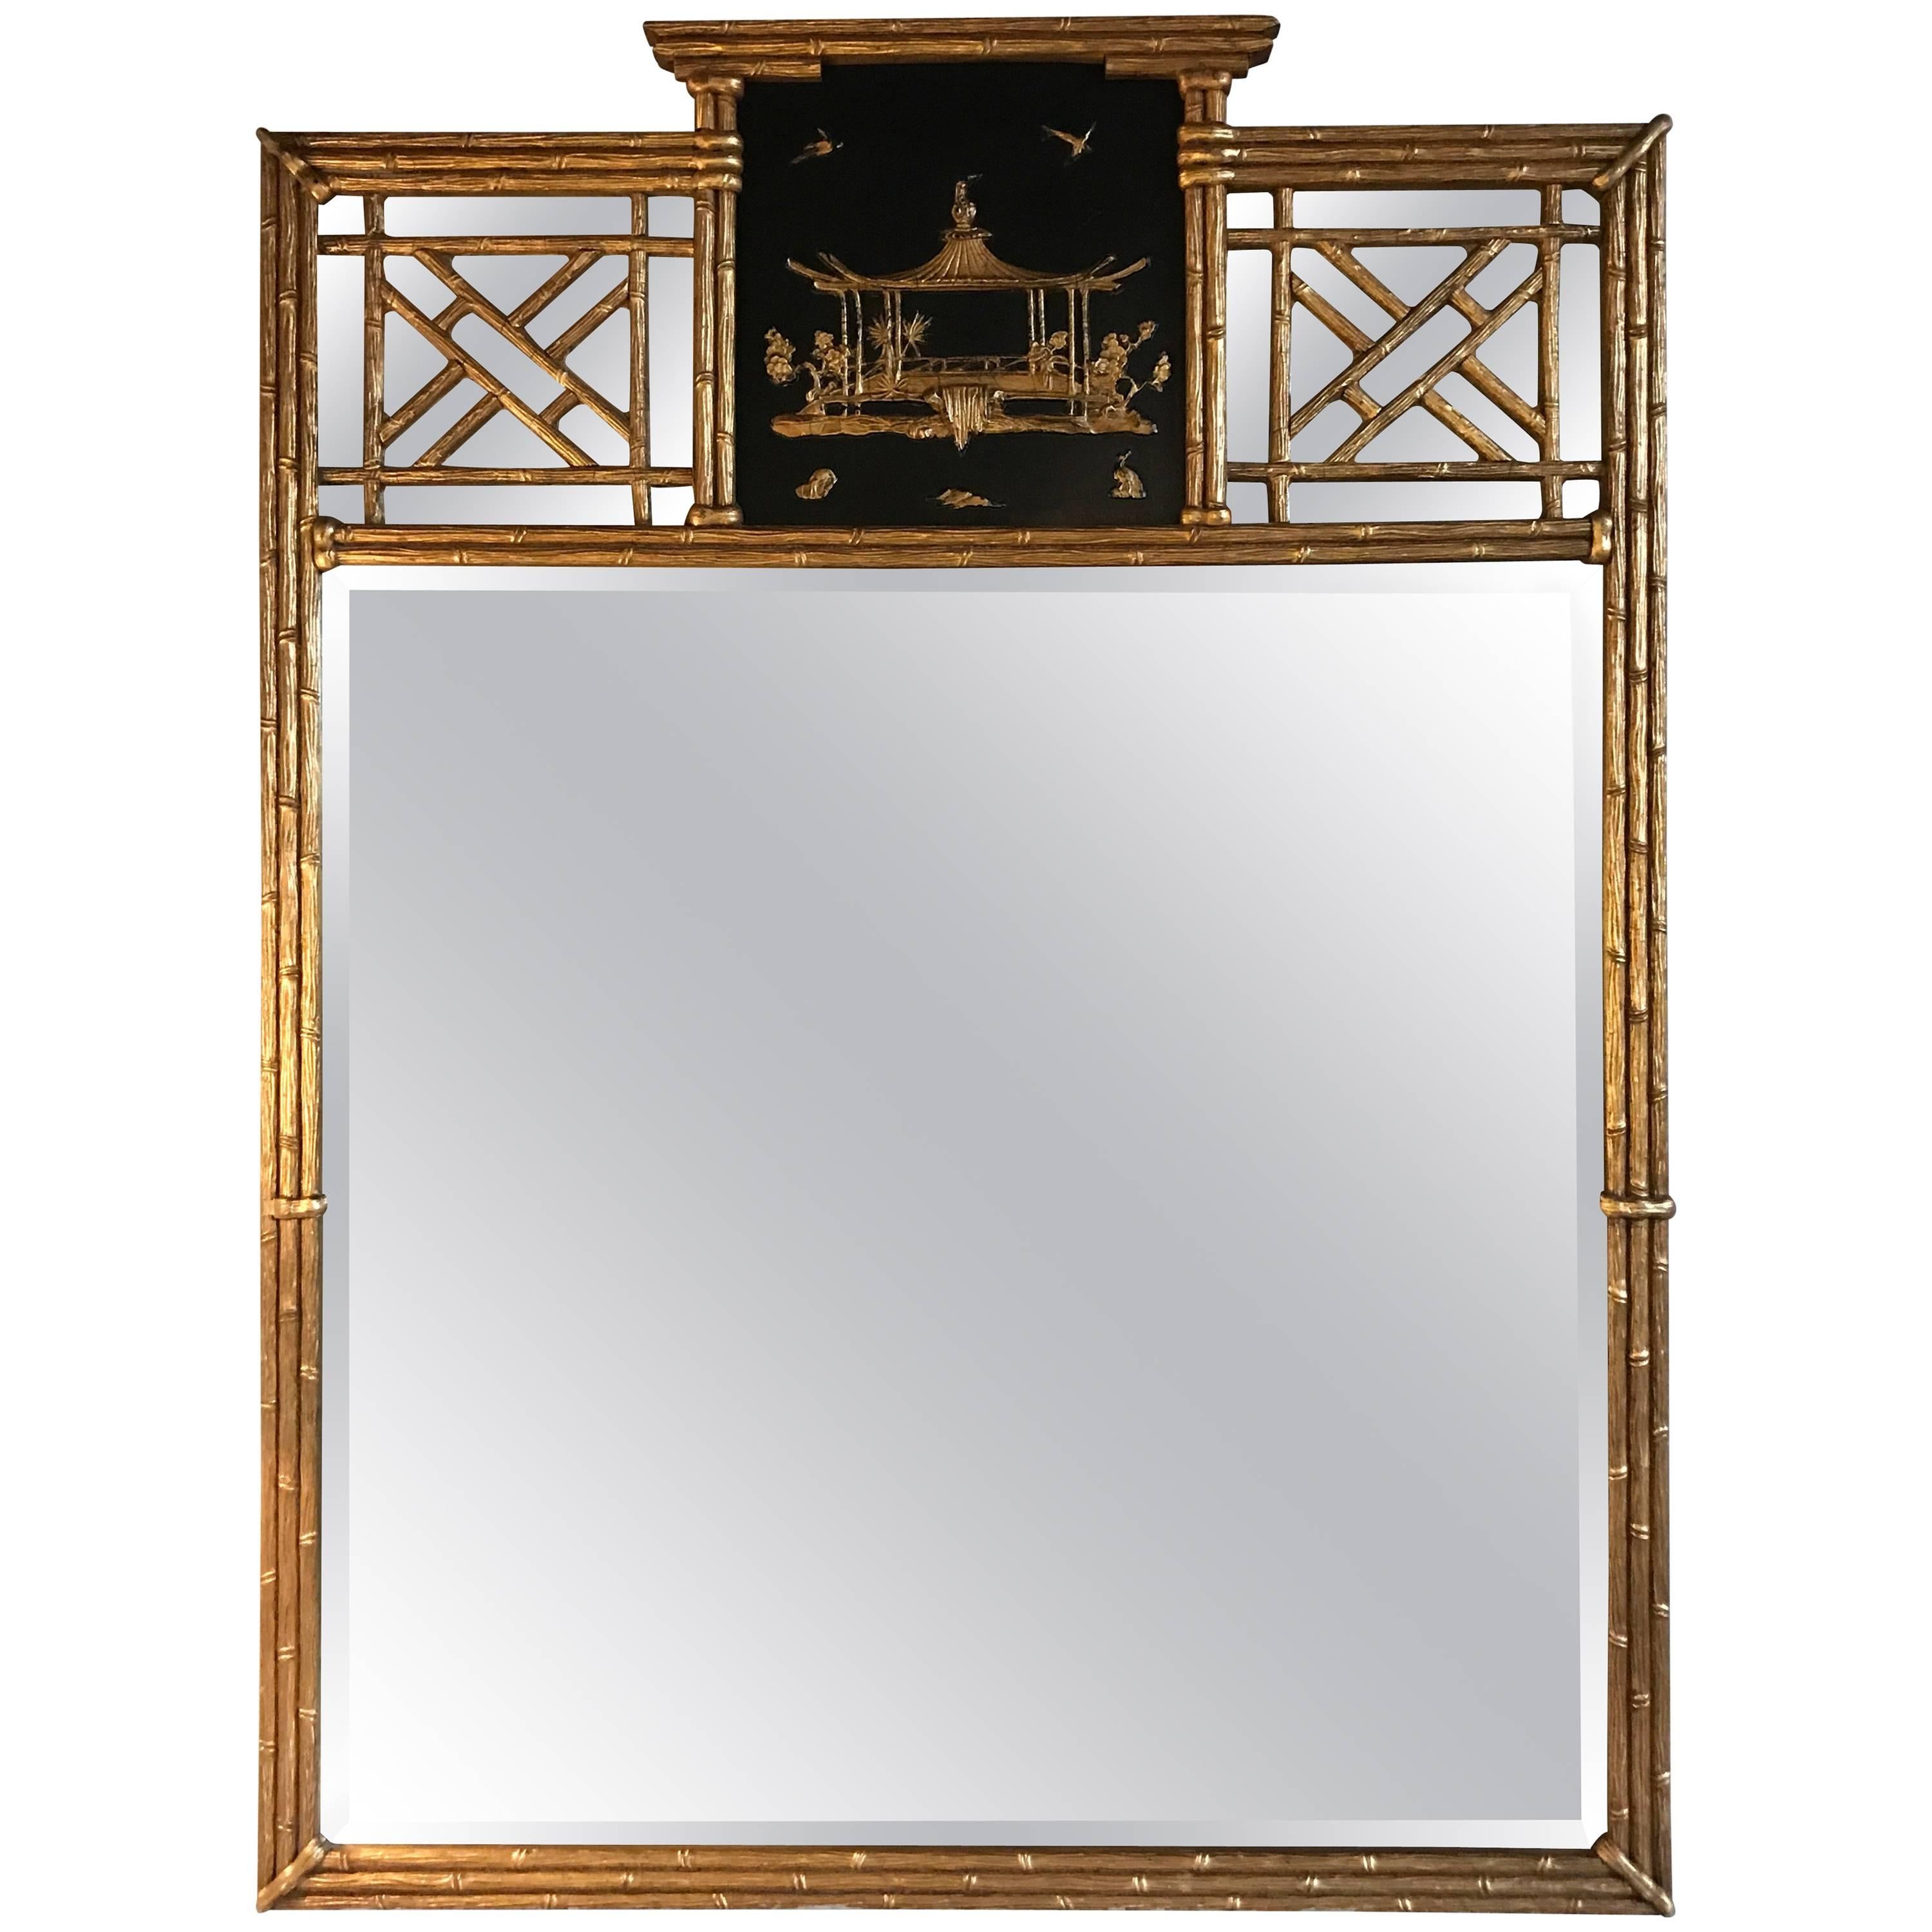 Chinoiserie Style Gilt and Ebony Decorated Beveled Wall or Console Mirror